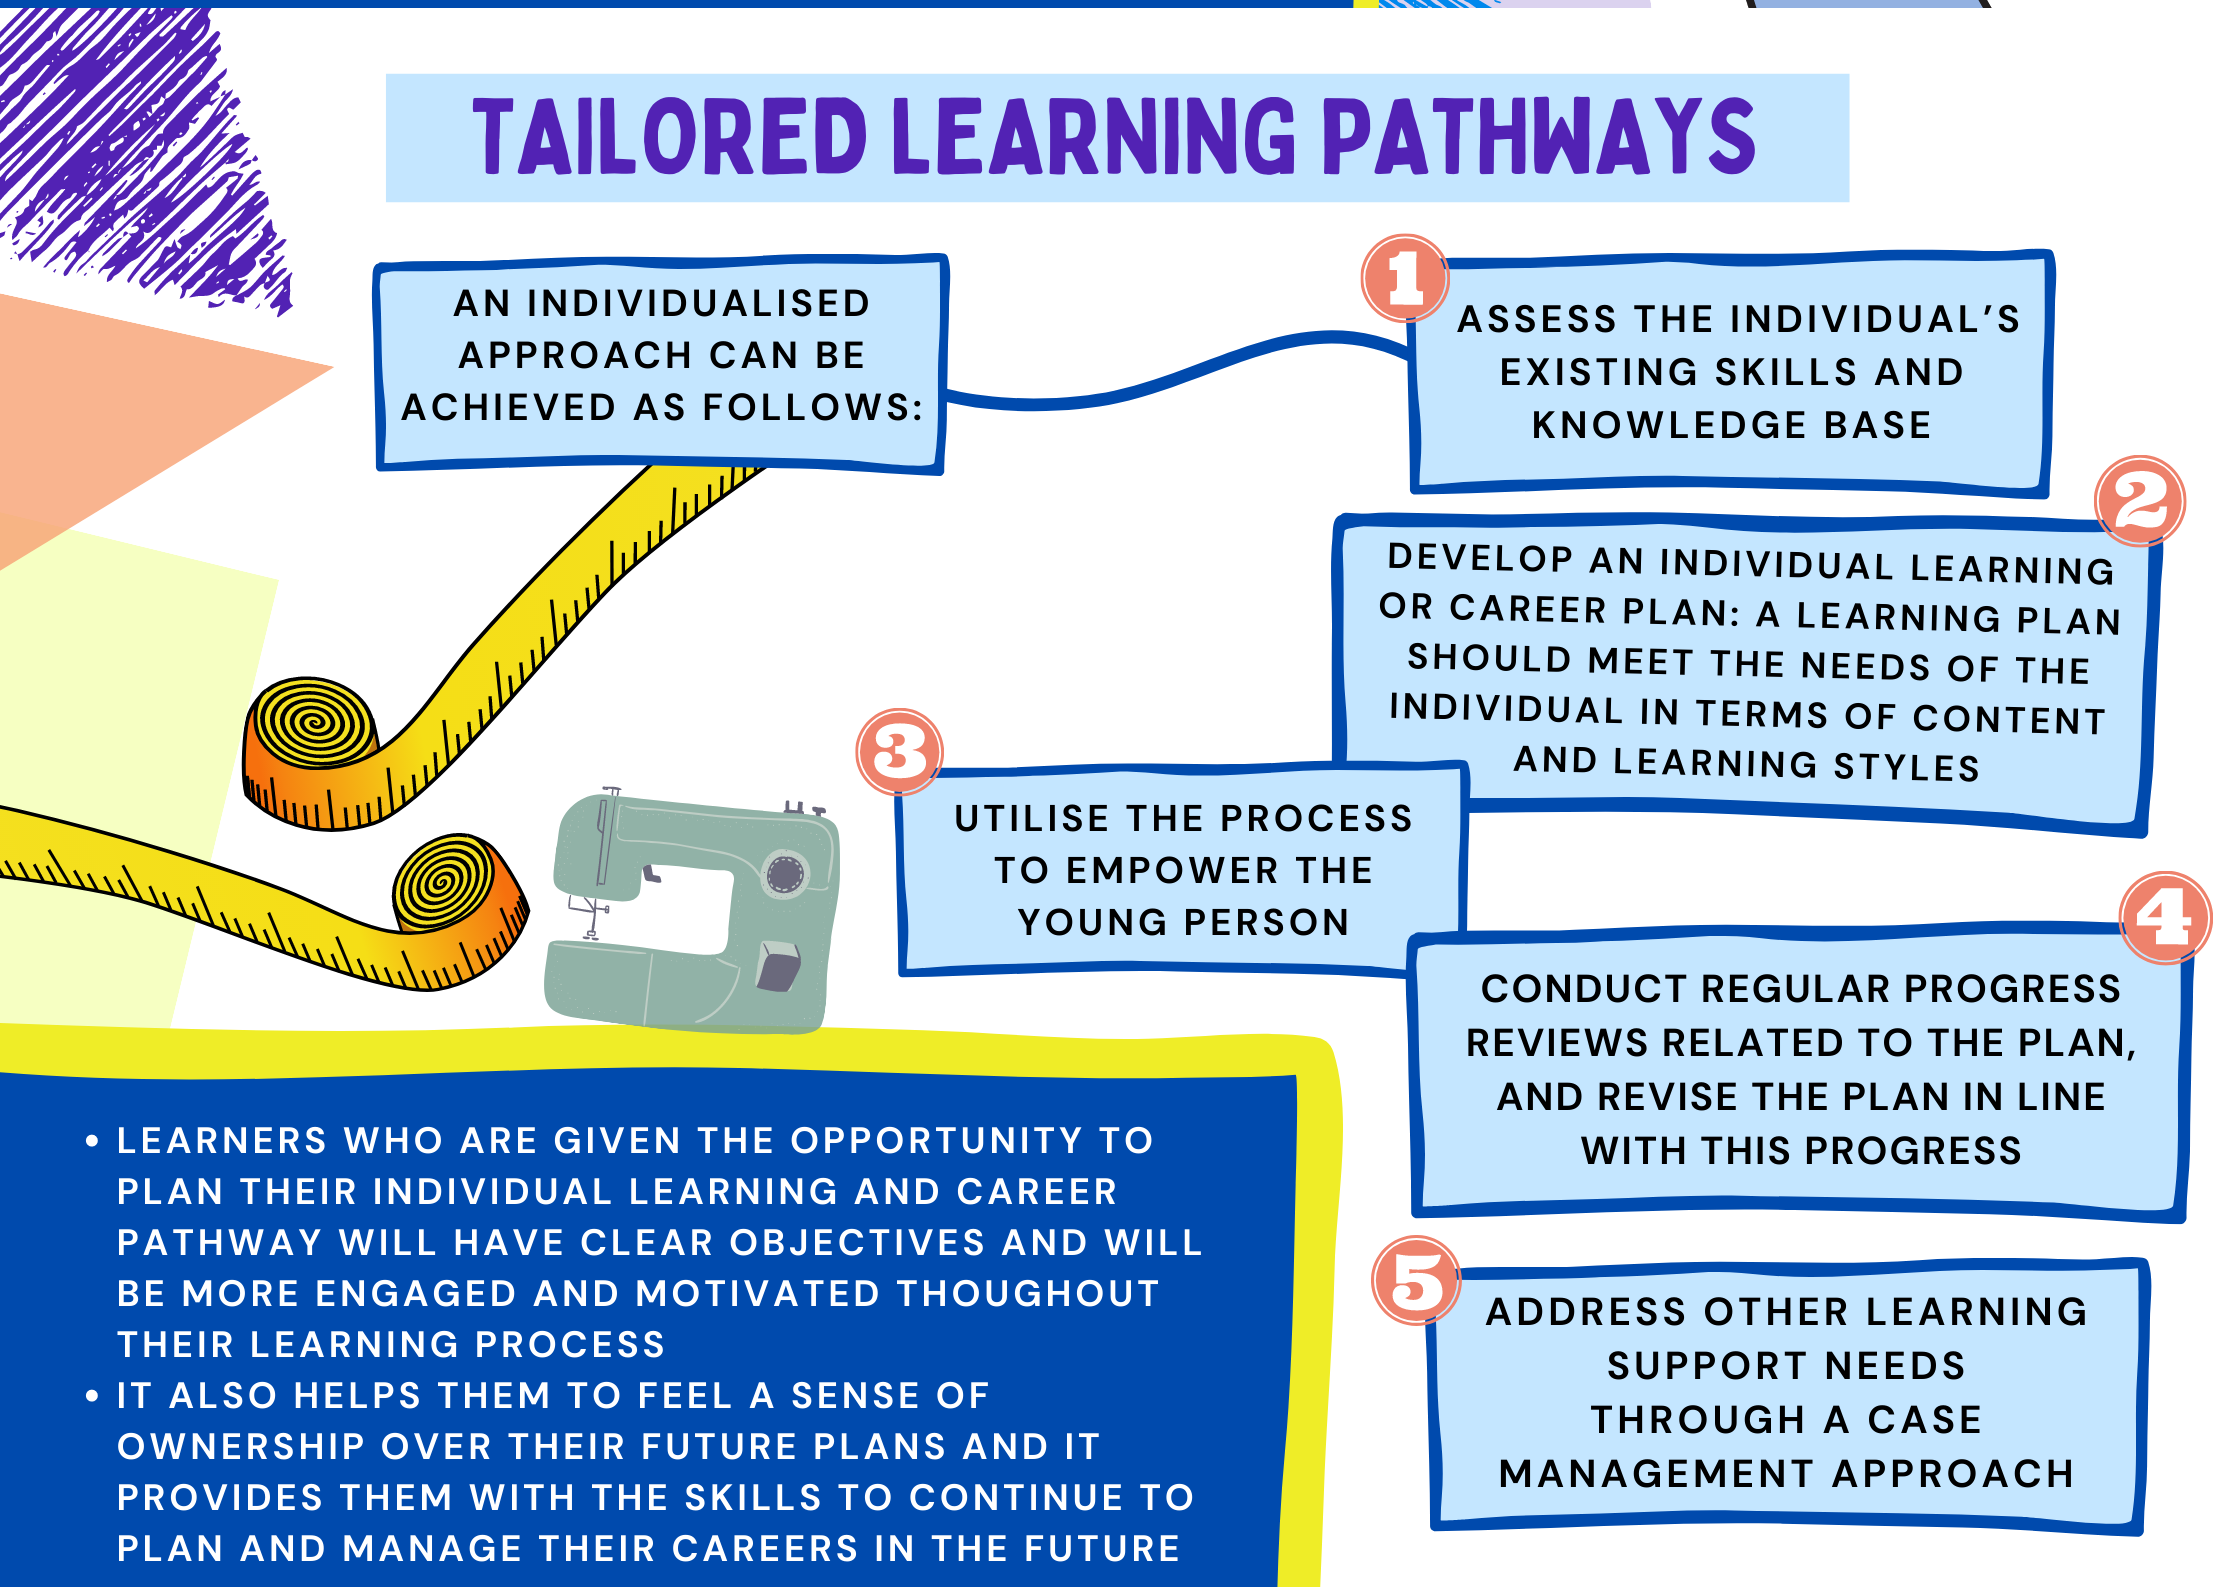 18_tailored learning pathways